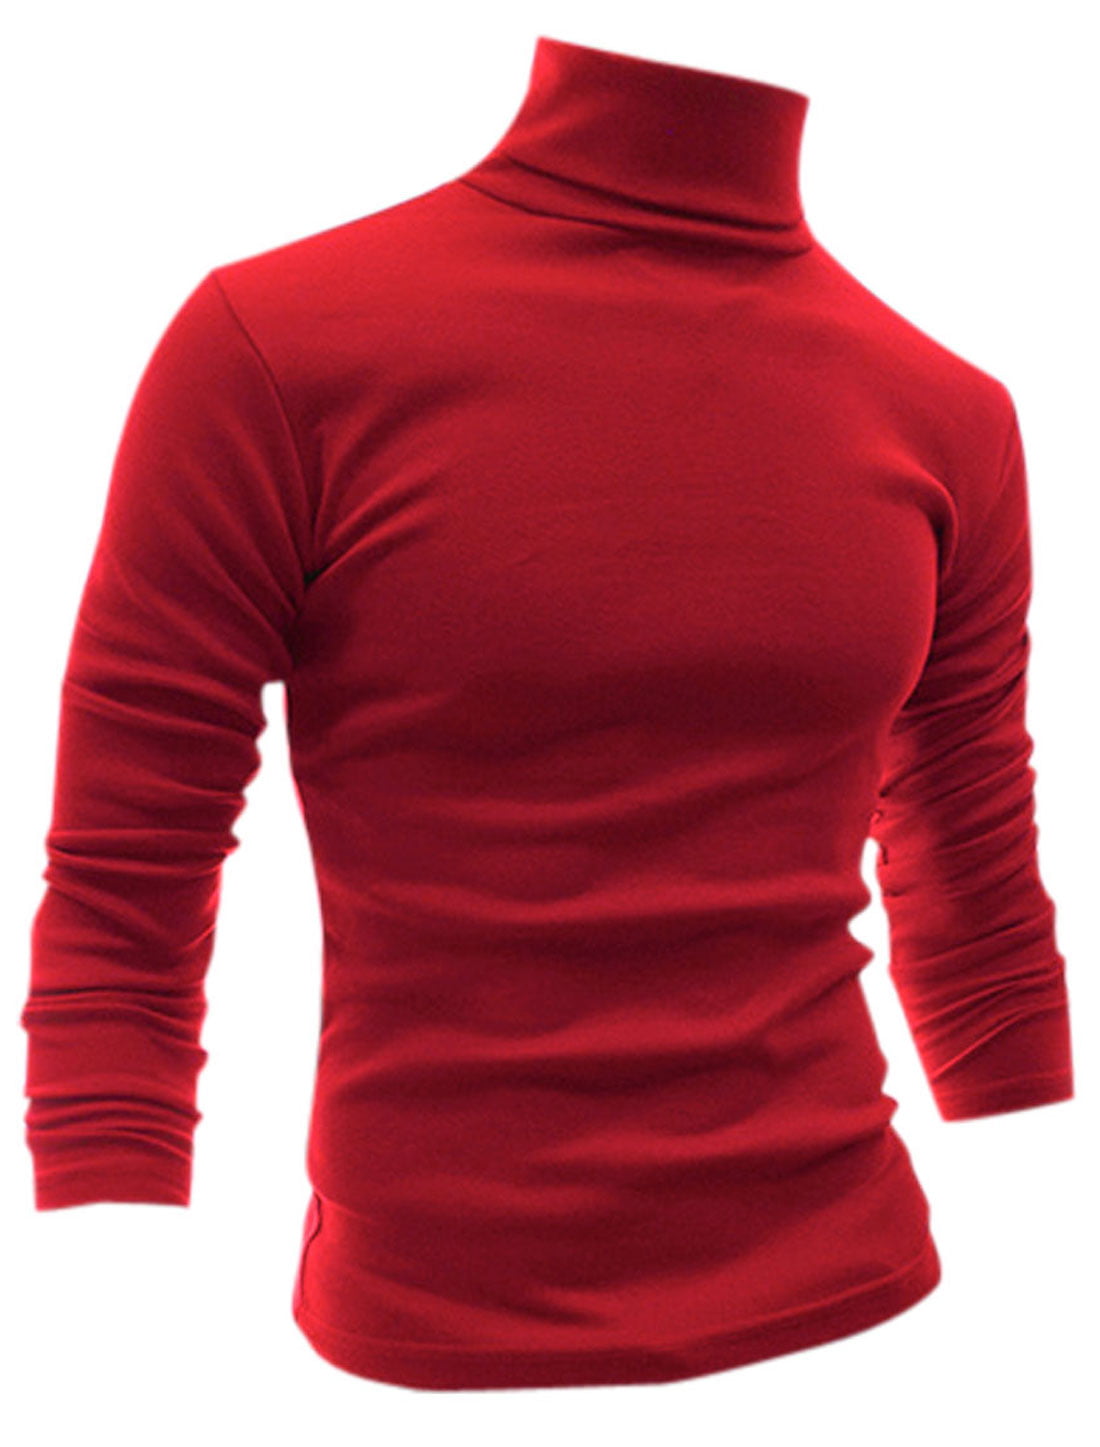 Men Turtle Neck Long Sleeves Stretchy Shirt Red XL | Walmart Canada